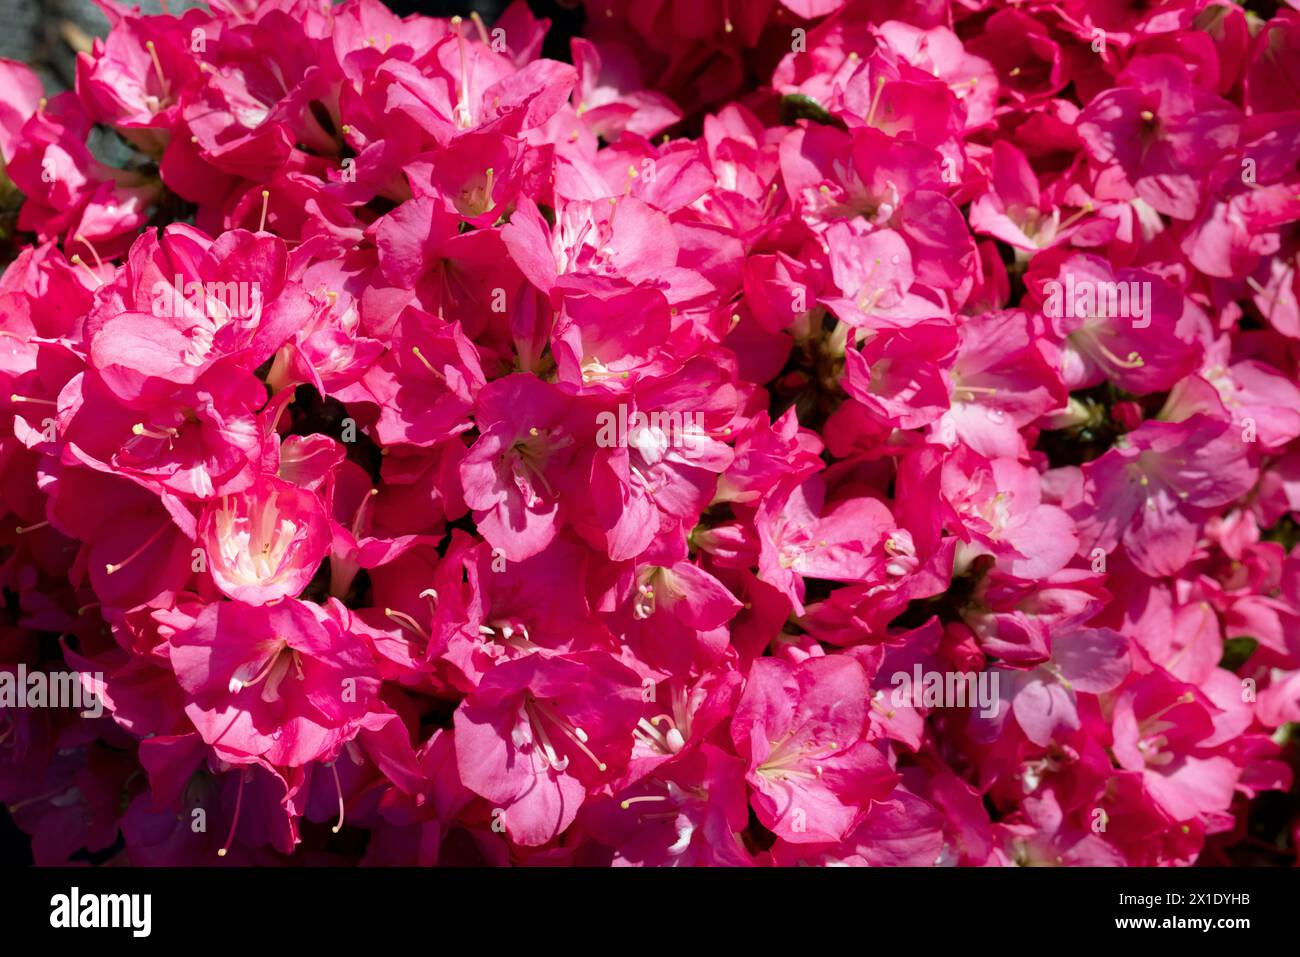 Flower and flowers of azaleas variety Rhododendron, blooming in spring. Closeup, selective focus Stock Photo